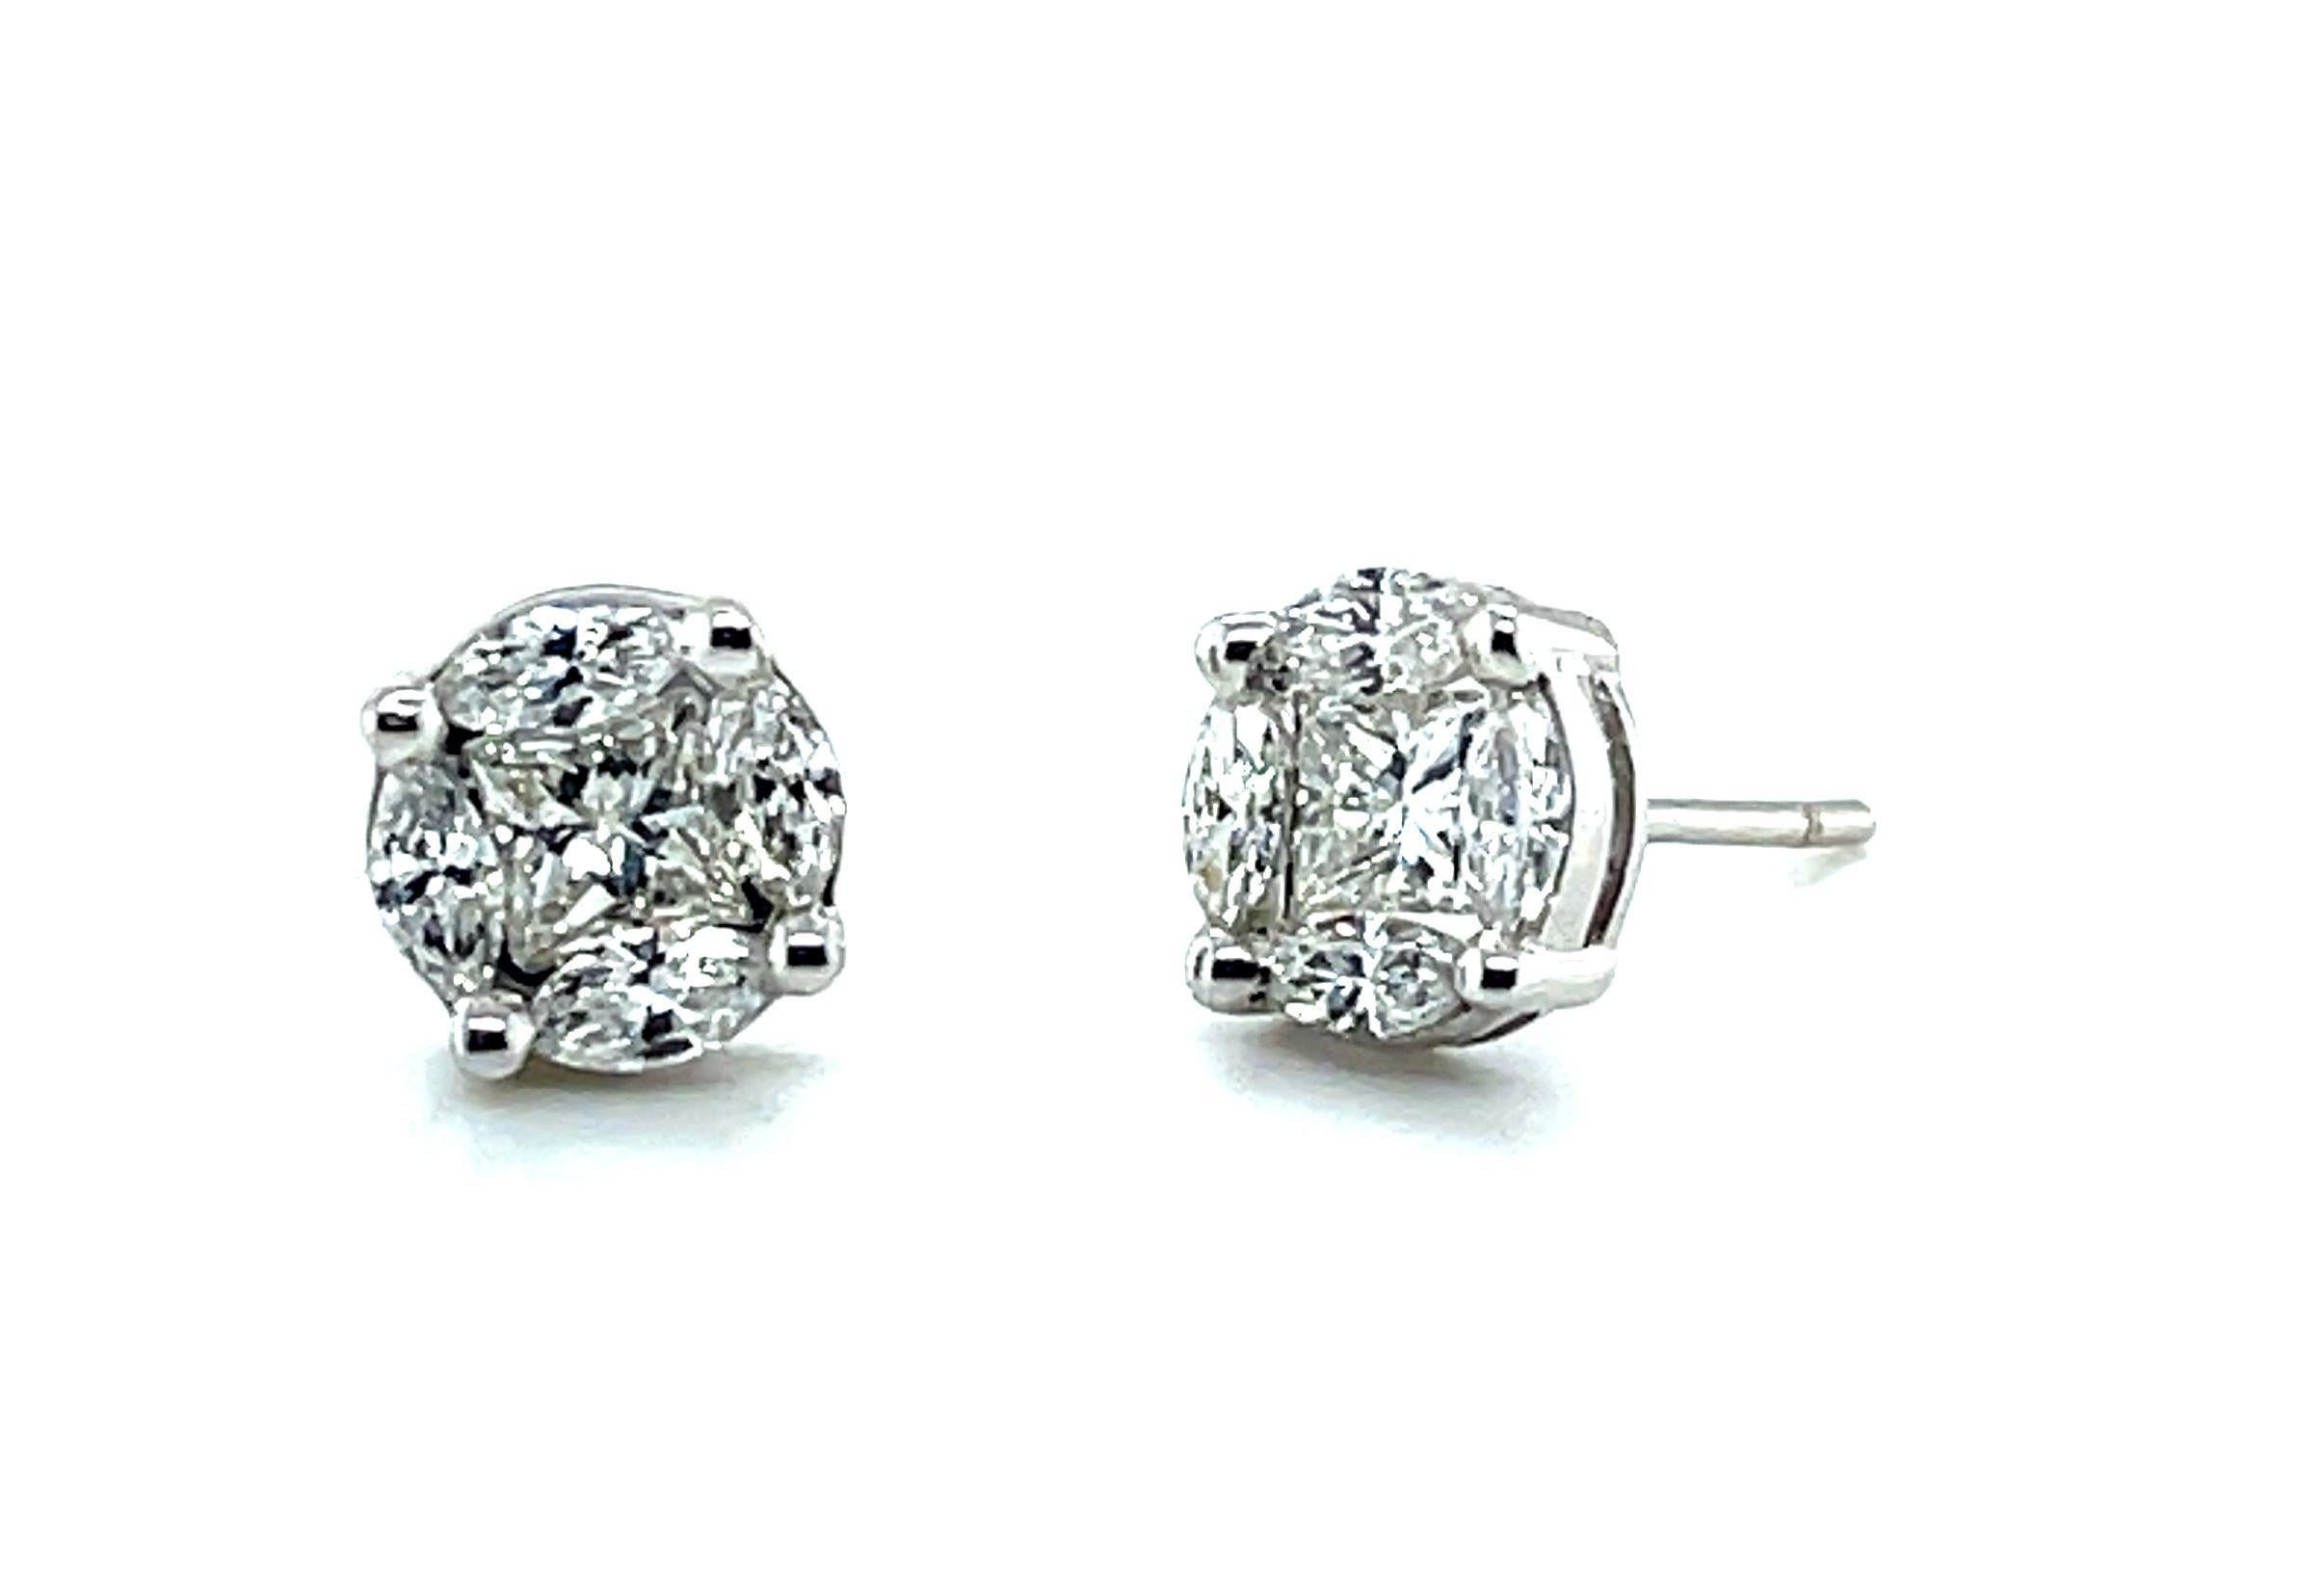 Each of these diamond stud earrings looks as though it is made of a single diamond when worn. It is a beautiful illusion! (Take a look at the size and scale on our model in the photographs of these earrings.) In fact, each earring is comprised of a